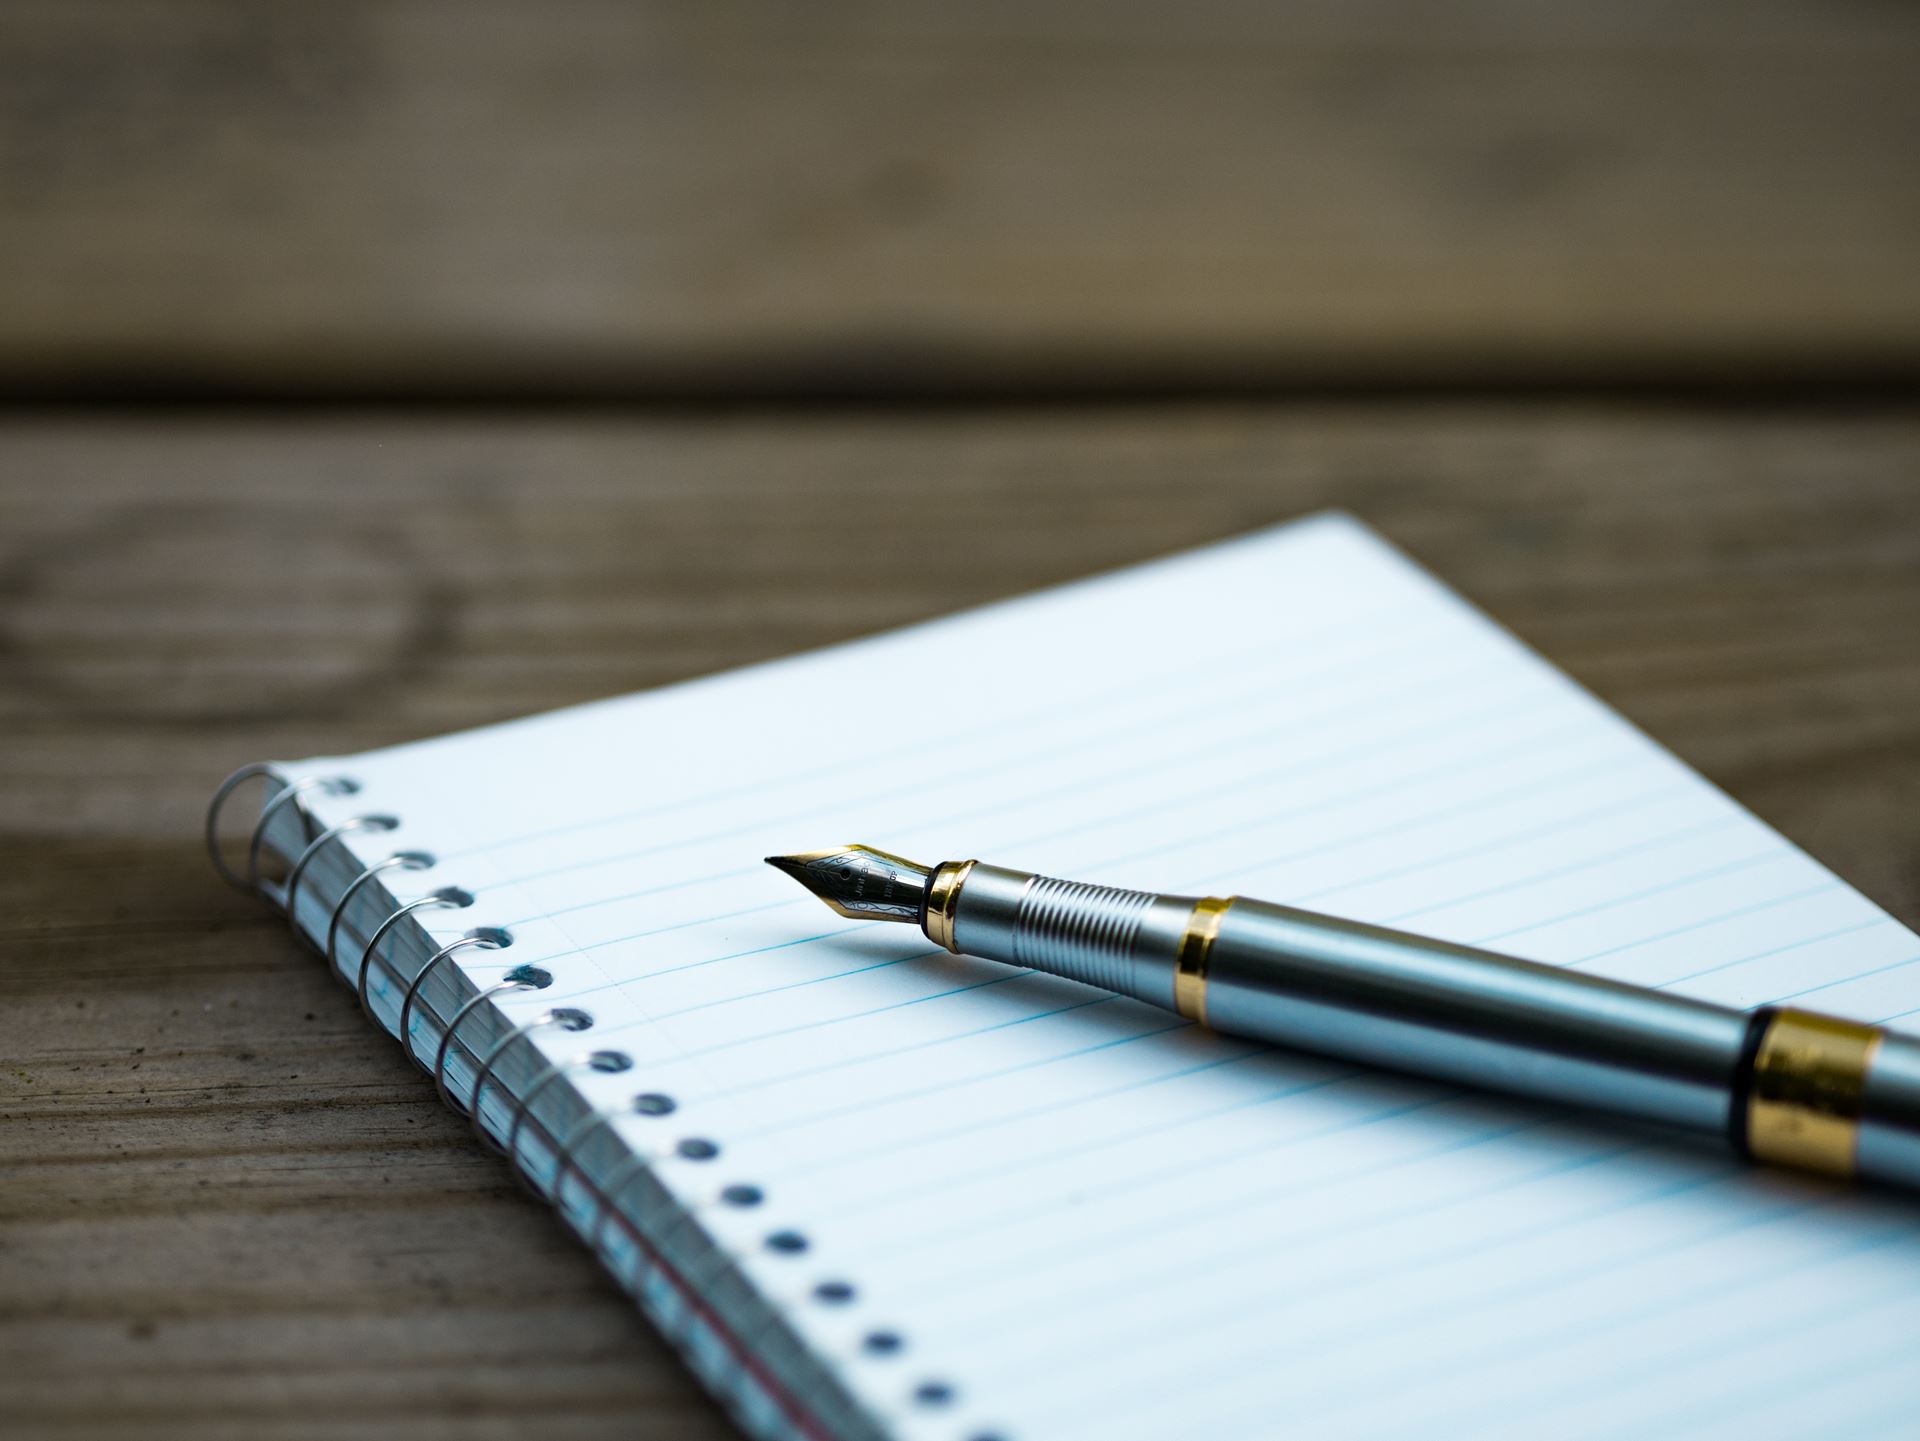 A fountain pen is placed on an empty notebook